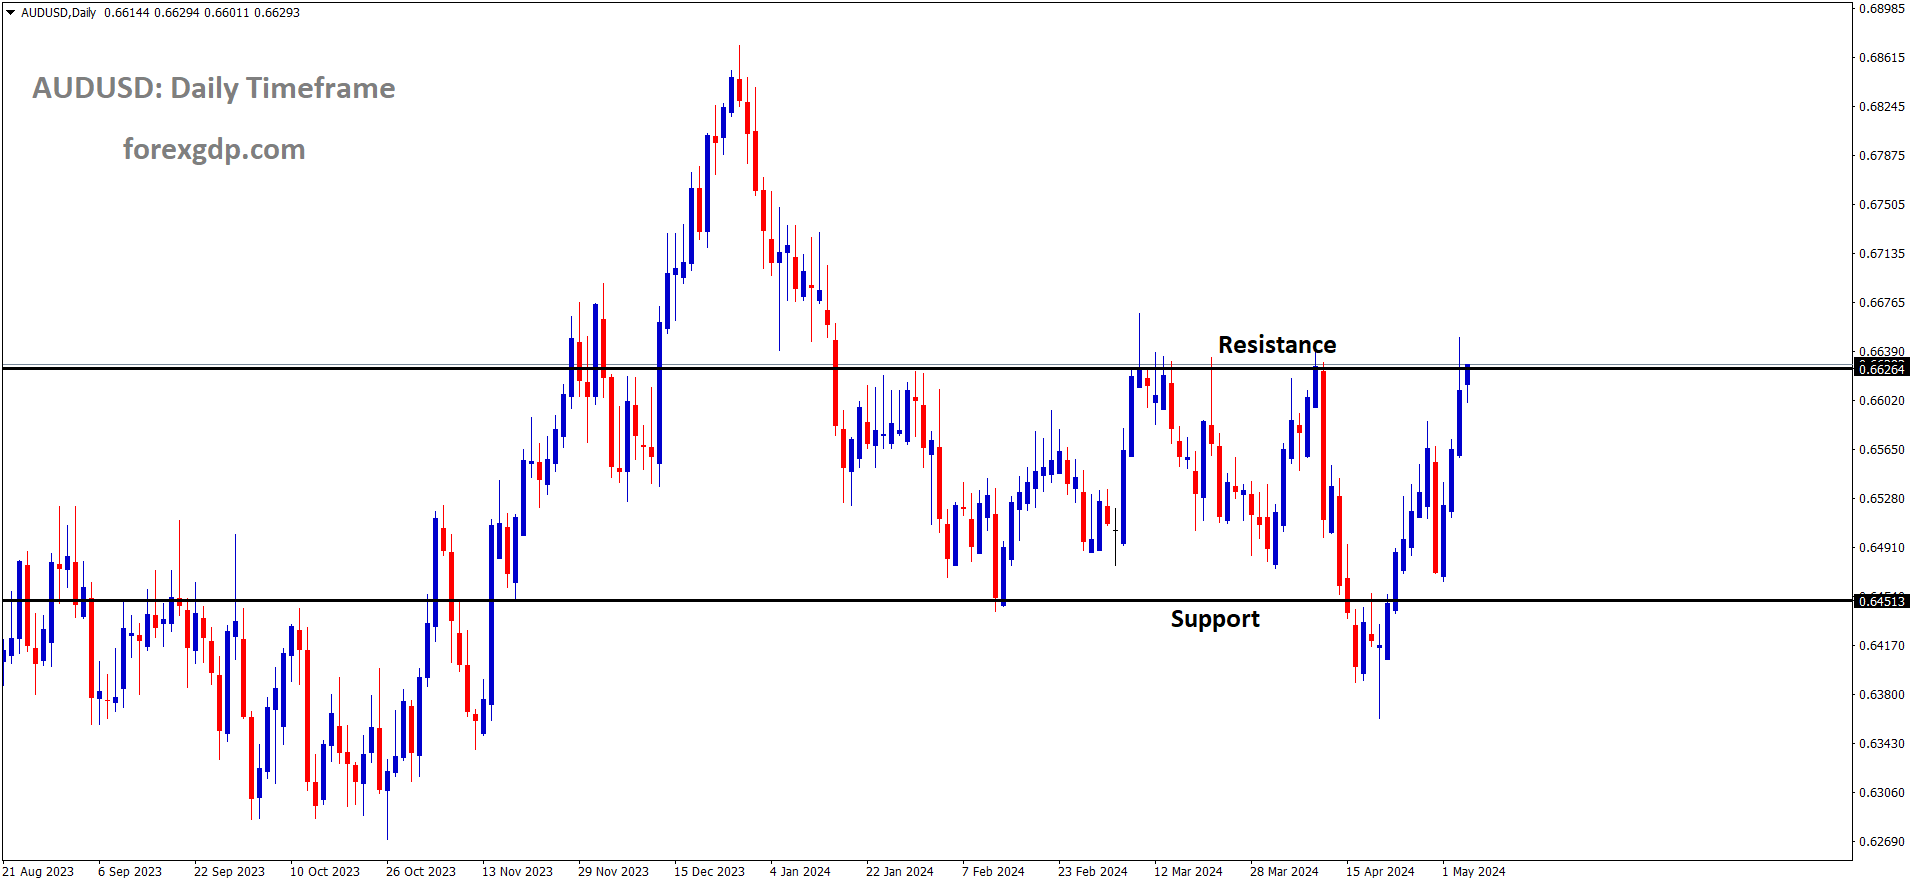 AUDUSD is moving in the Box pattern and the market has reached the resistance area of the pattern